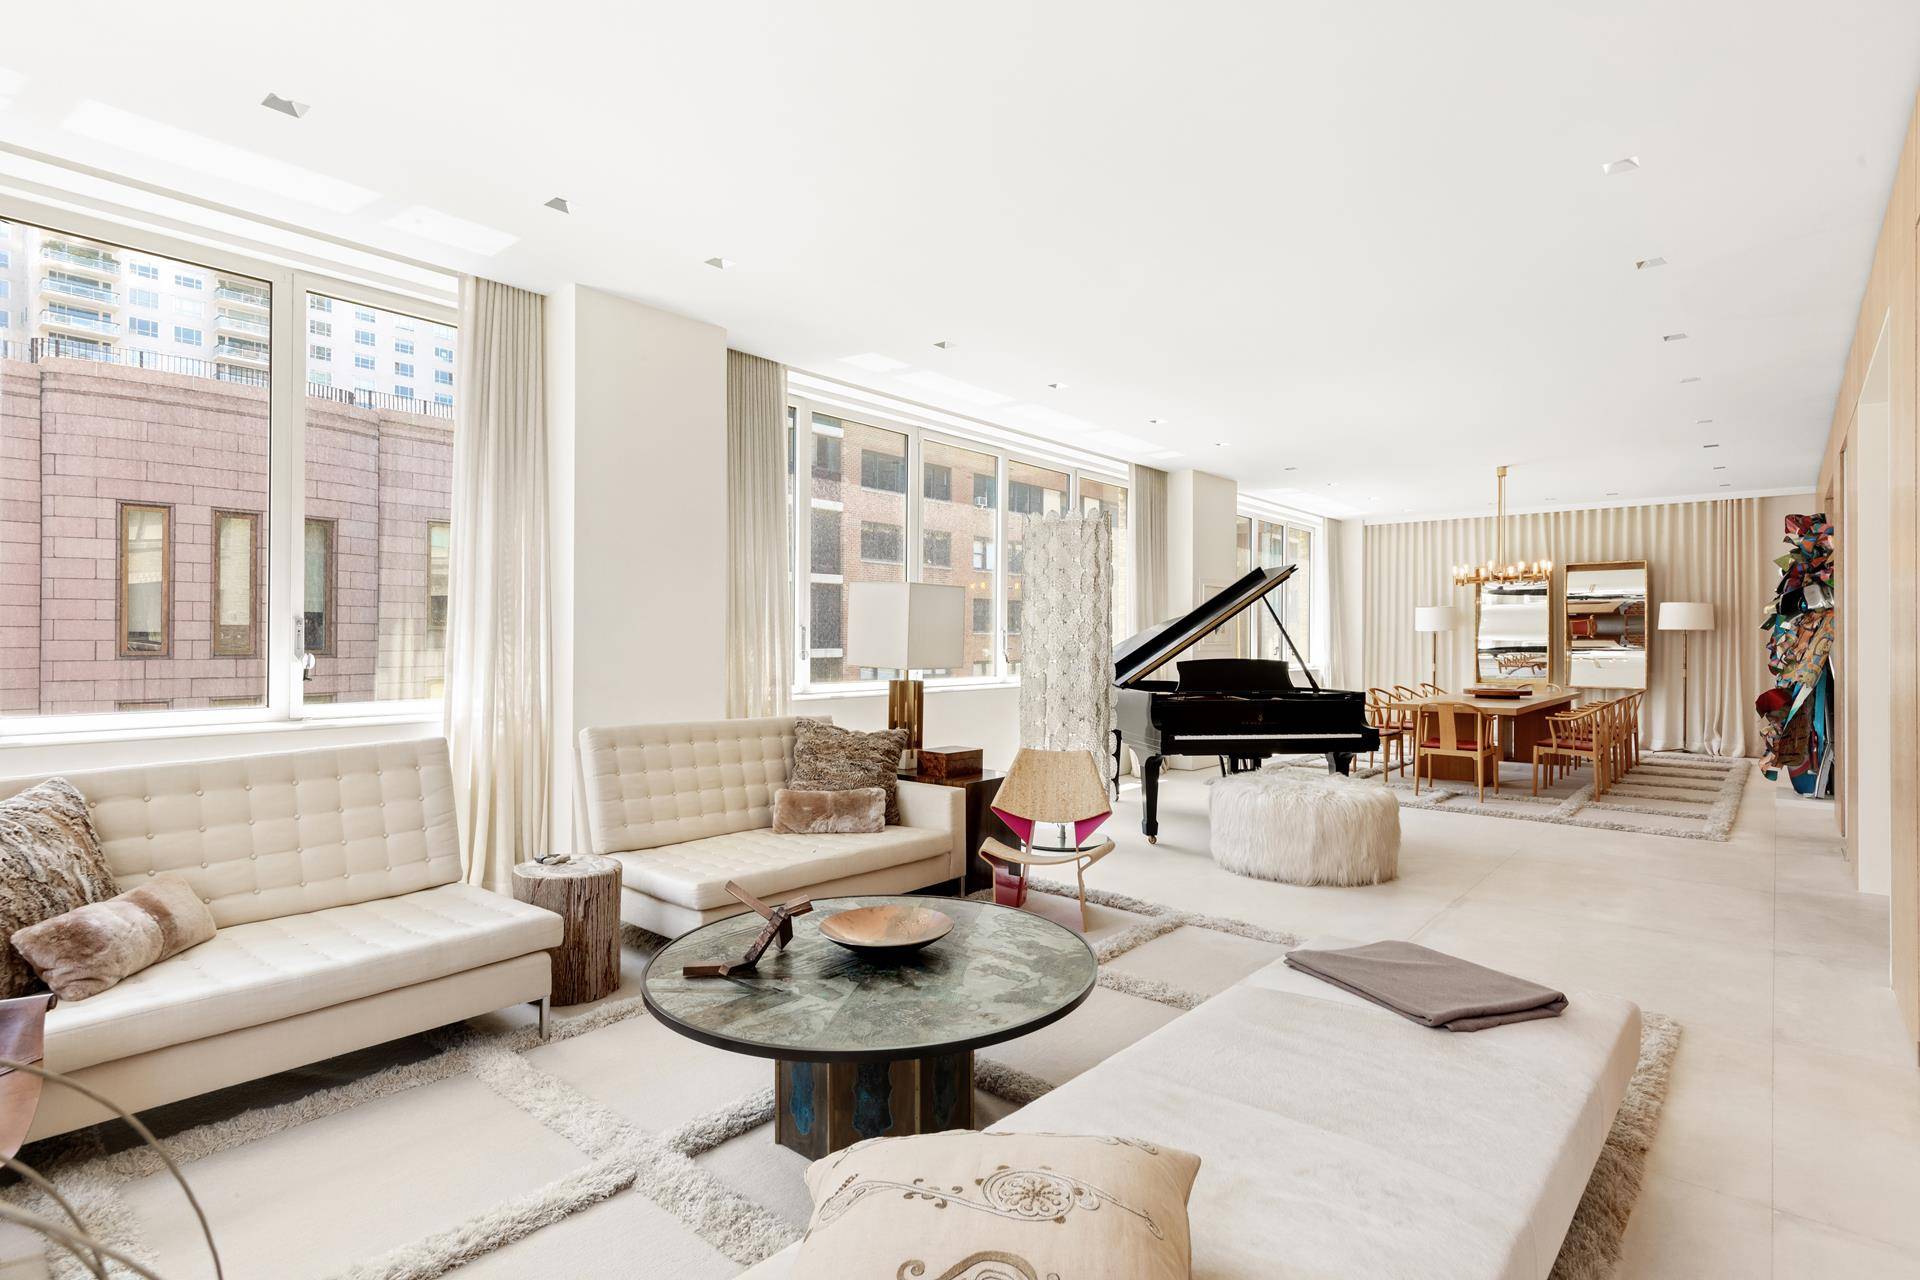 A meticulously renovated five bedroom, full floor loft in a white glove boutique building.